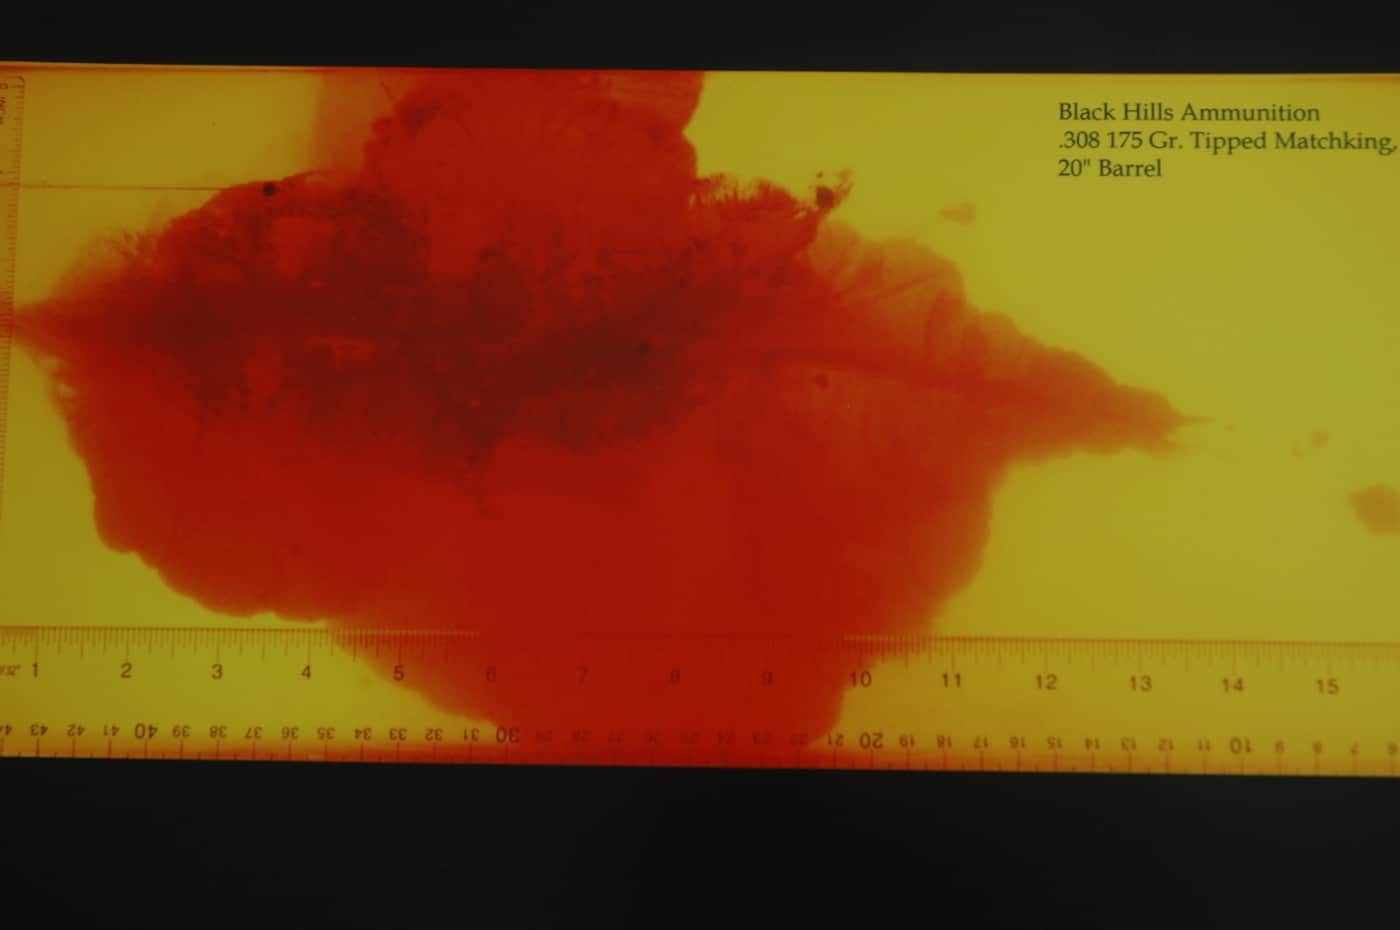 In this photograph, we see the kind of tissue damage a pointed soft point can do in ballistic gelatin. This gives us an idea of if the load is good for deer compared to cast bullets. When hunting deer, a ballistic tip bullet is much better than a full metal jacket round. You want to humanely kill a deer not just cause a blood trail. 